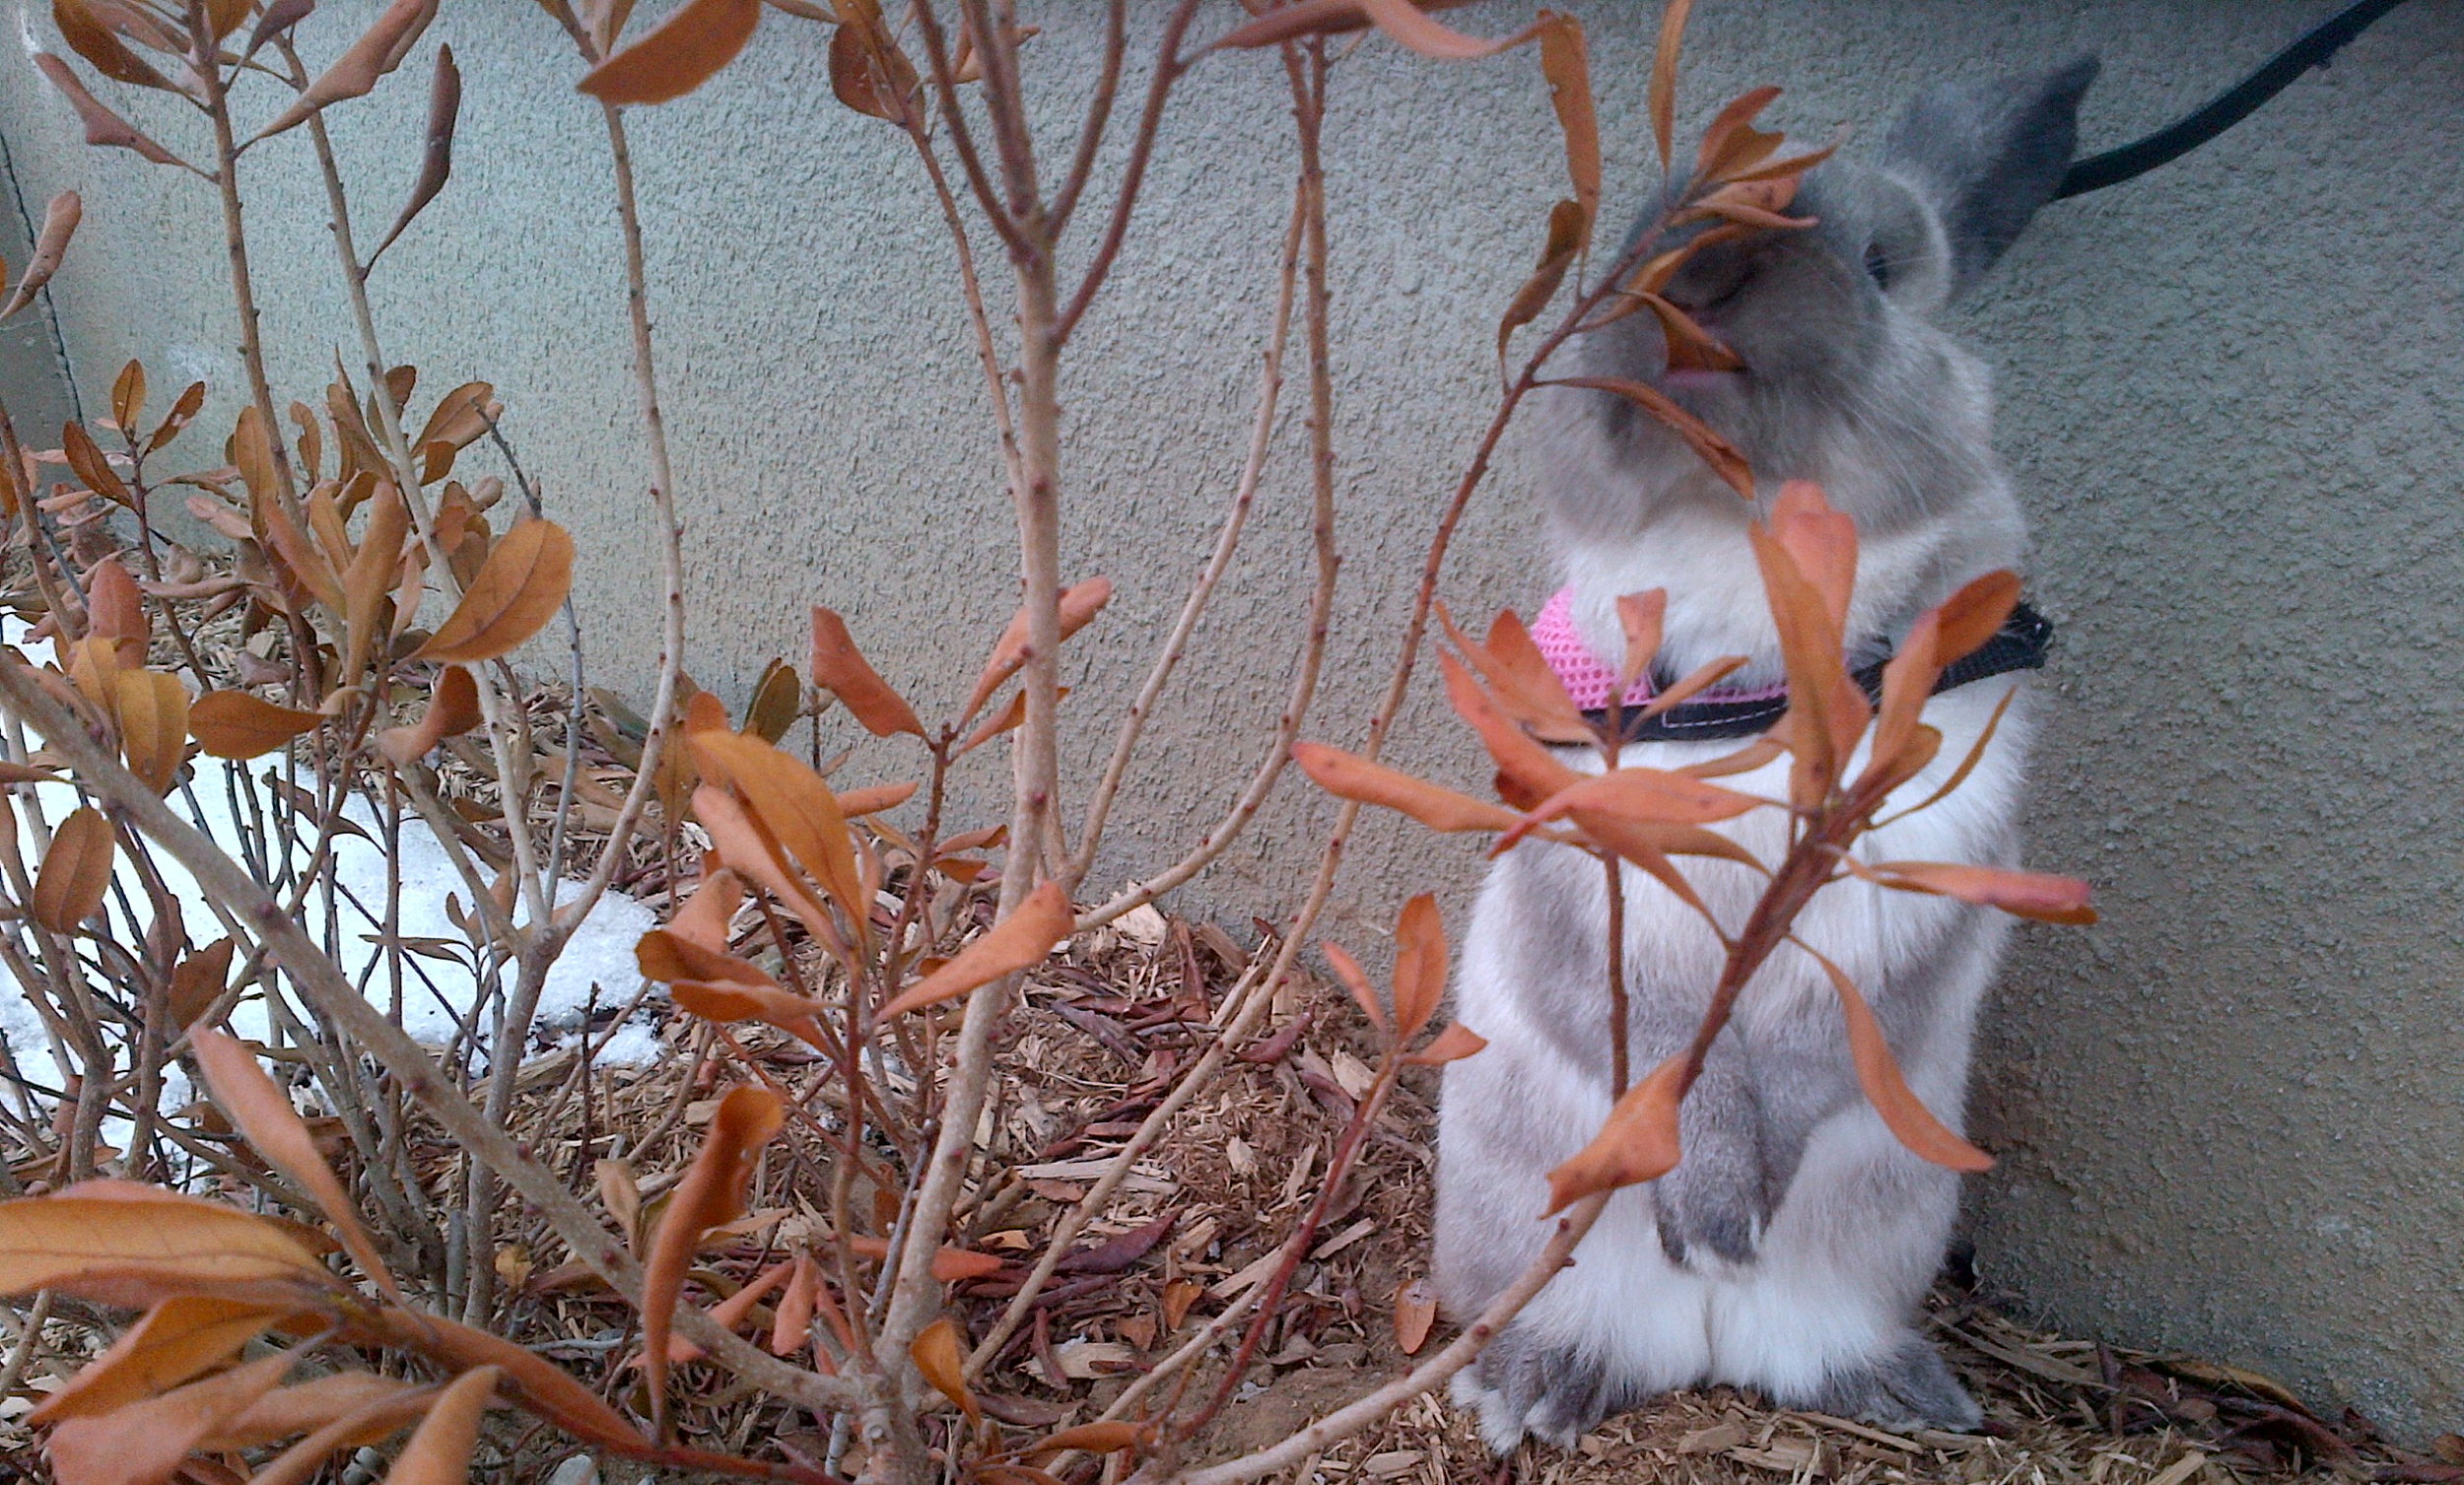 Bunny Samples a Dry Leaf on a Trip to the Backyard